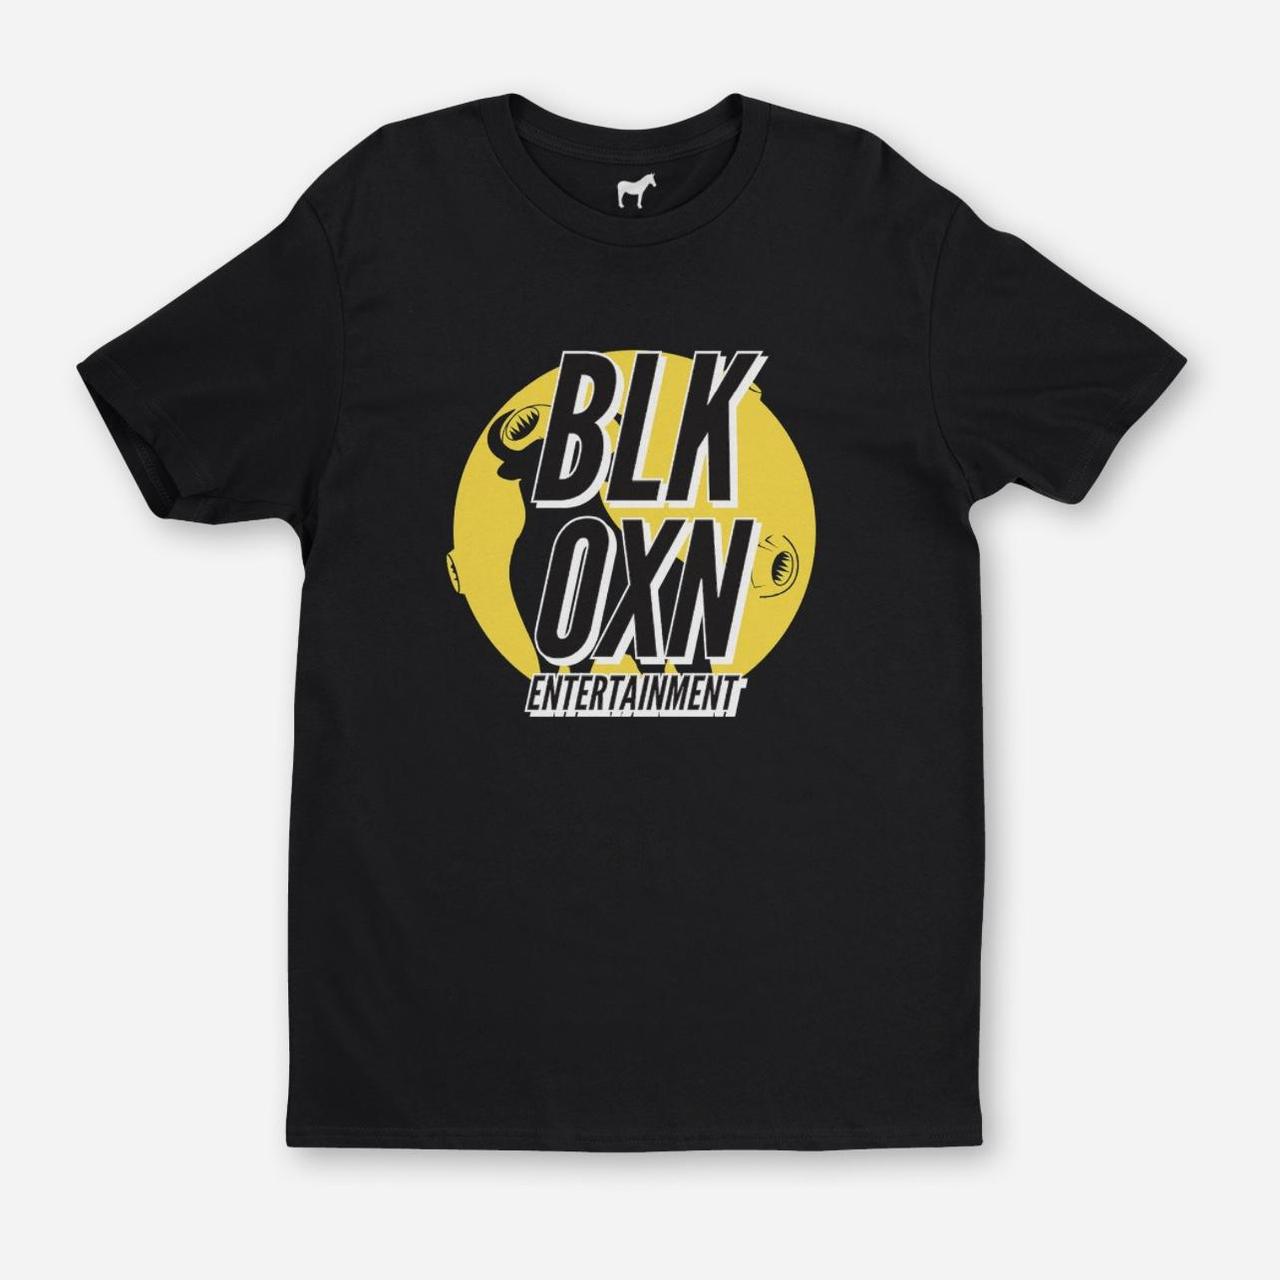 item listed by blkoxn